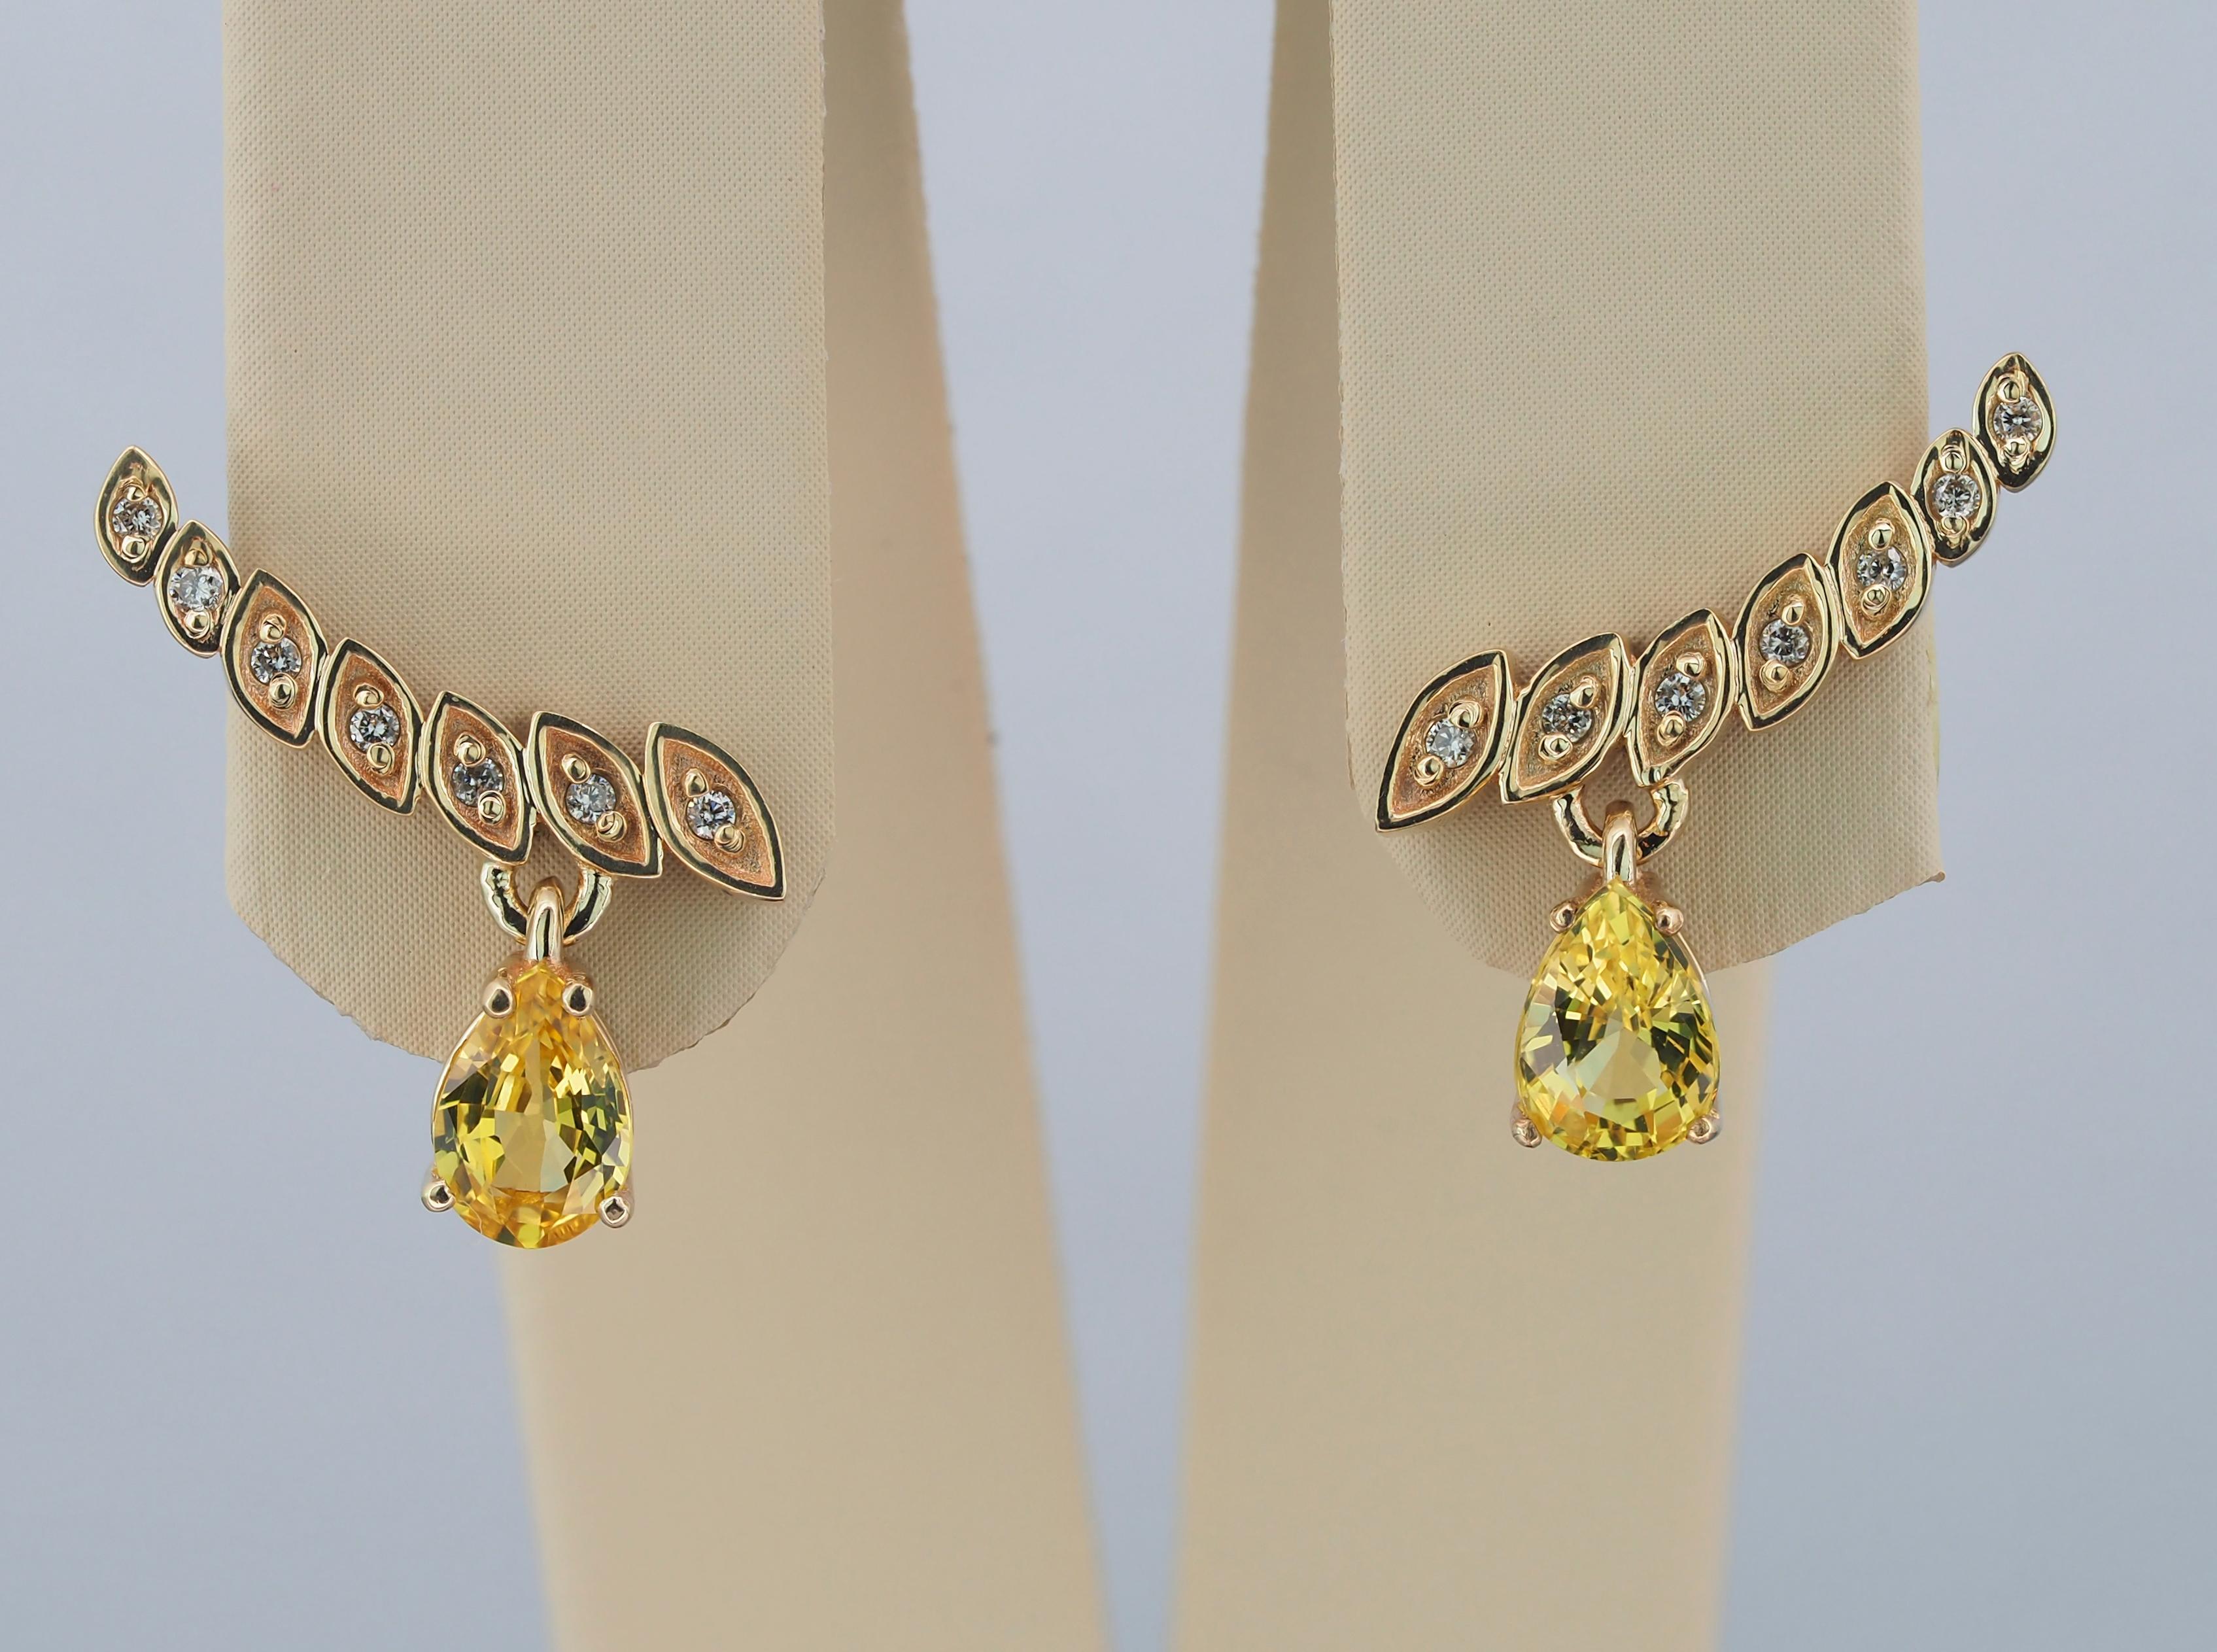 14 kt solid gold earrings with pear natural sapphires and diamonds. September birthstone.
Total weight: 2.3 g.
Size: 15.5 x 10 mm.

Central stones: Natural Sapphires - 2 pieces
Cut: Pear
Weight: approx 1.40 ct total. (6 x 4 mm each)
Color: Yellow,